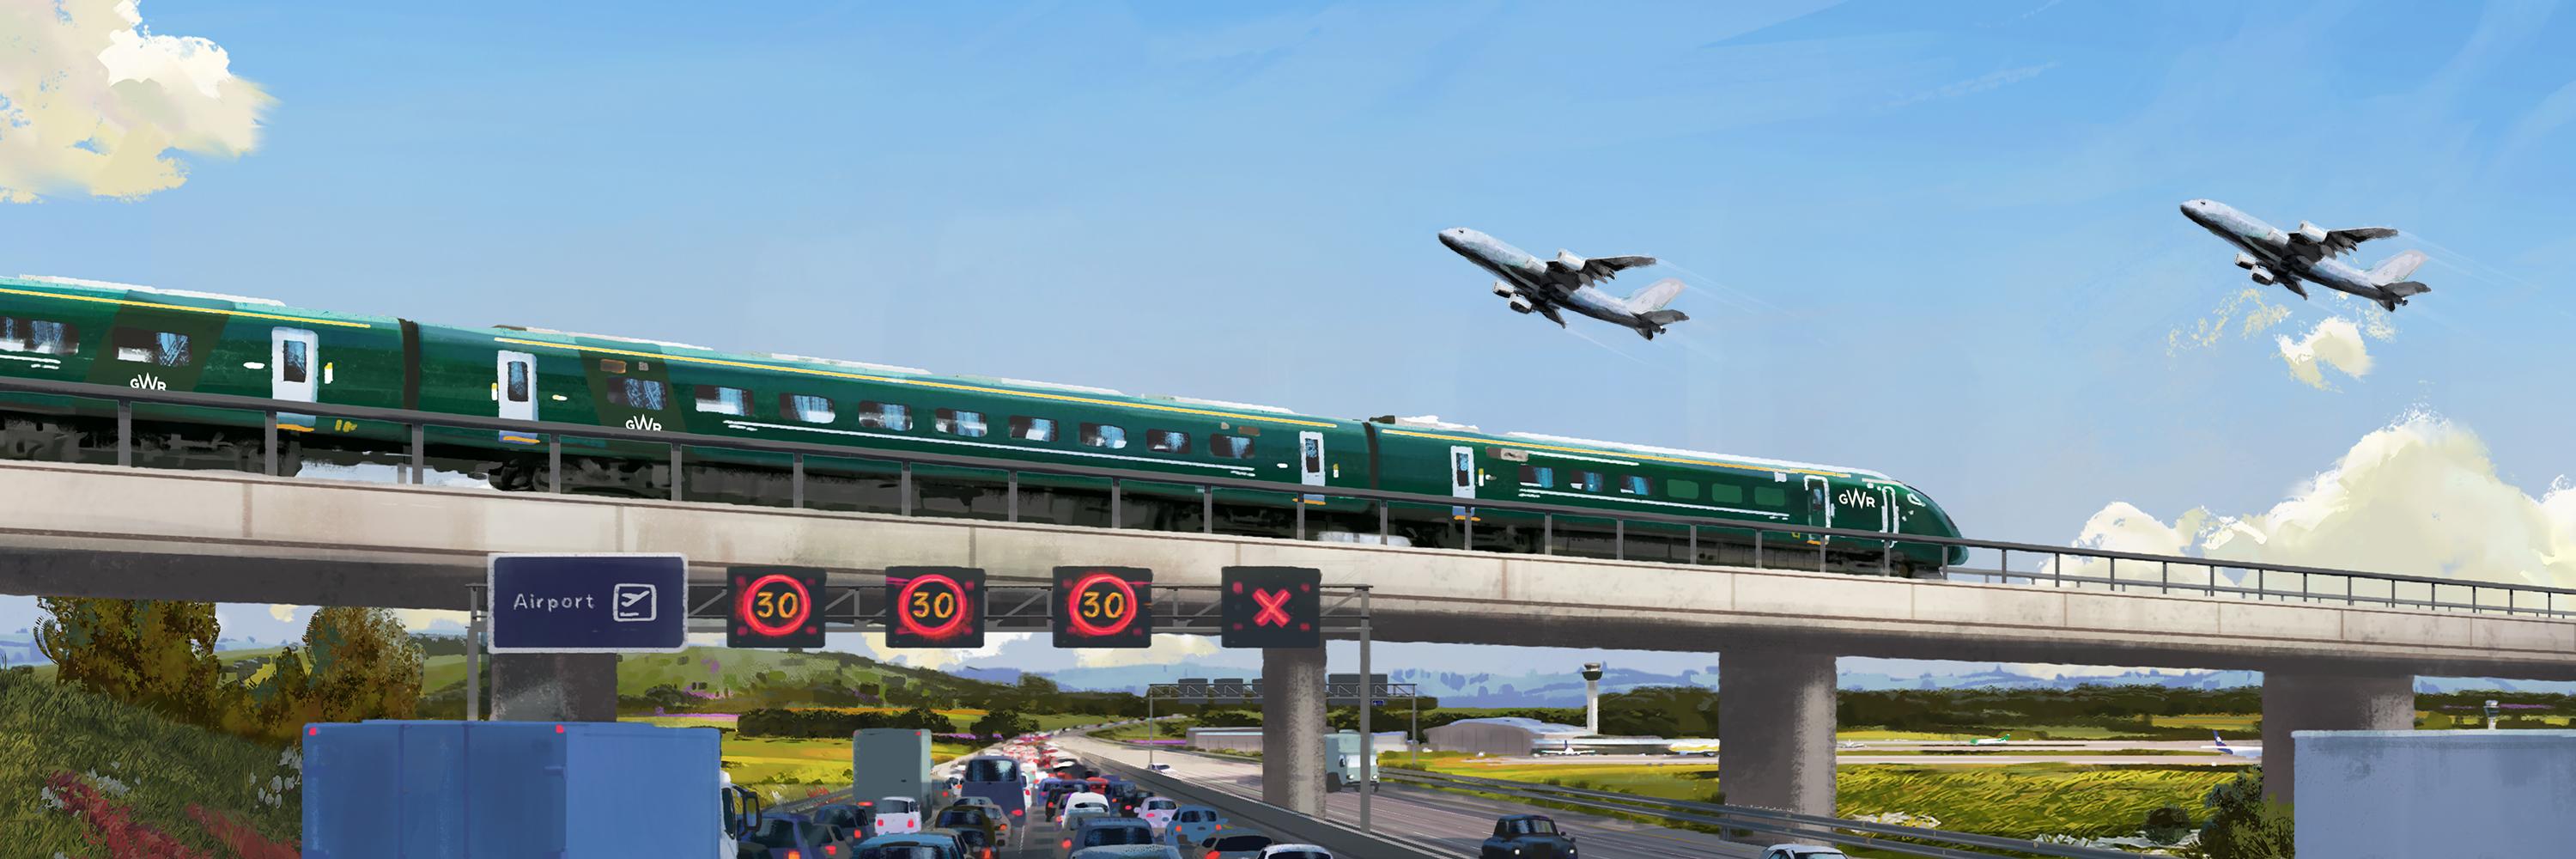 An illustration showing planes flying overhead of a GWR train, to promote increased services to Gatwick Airport from Reading.